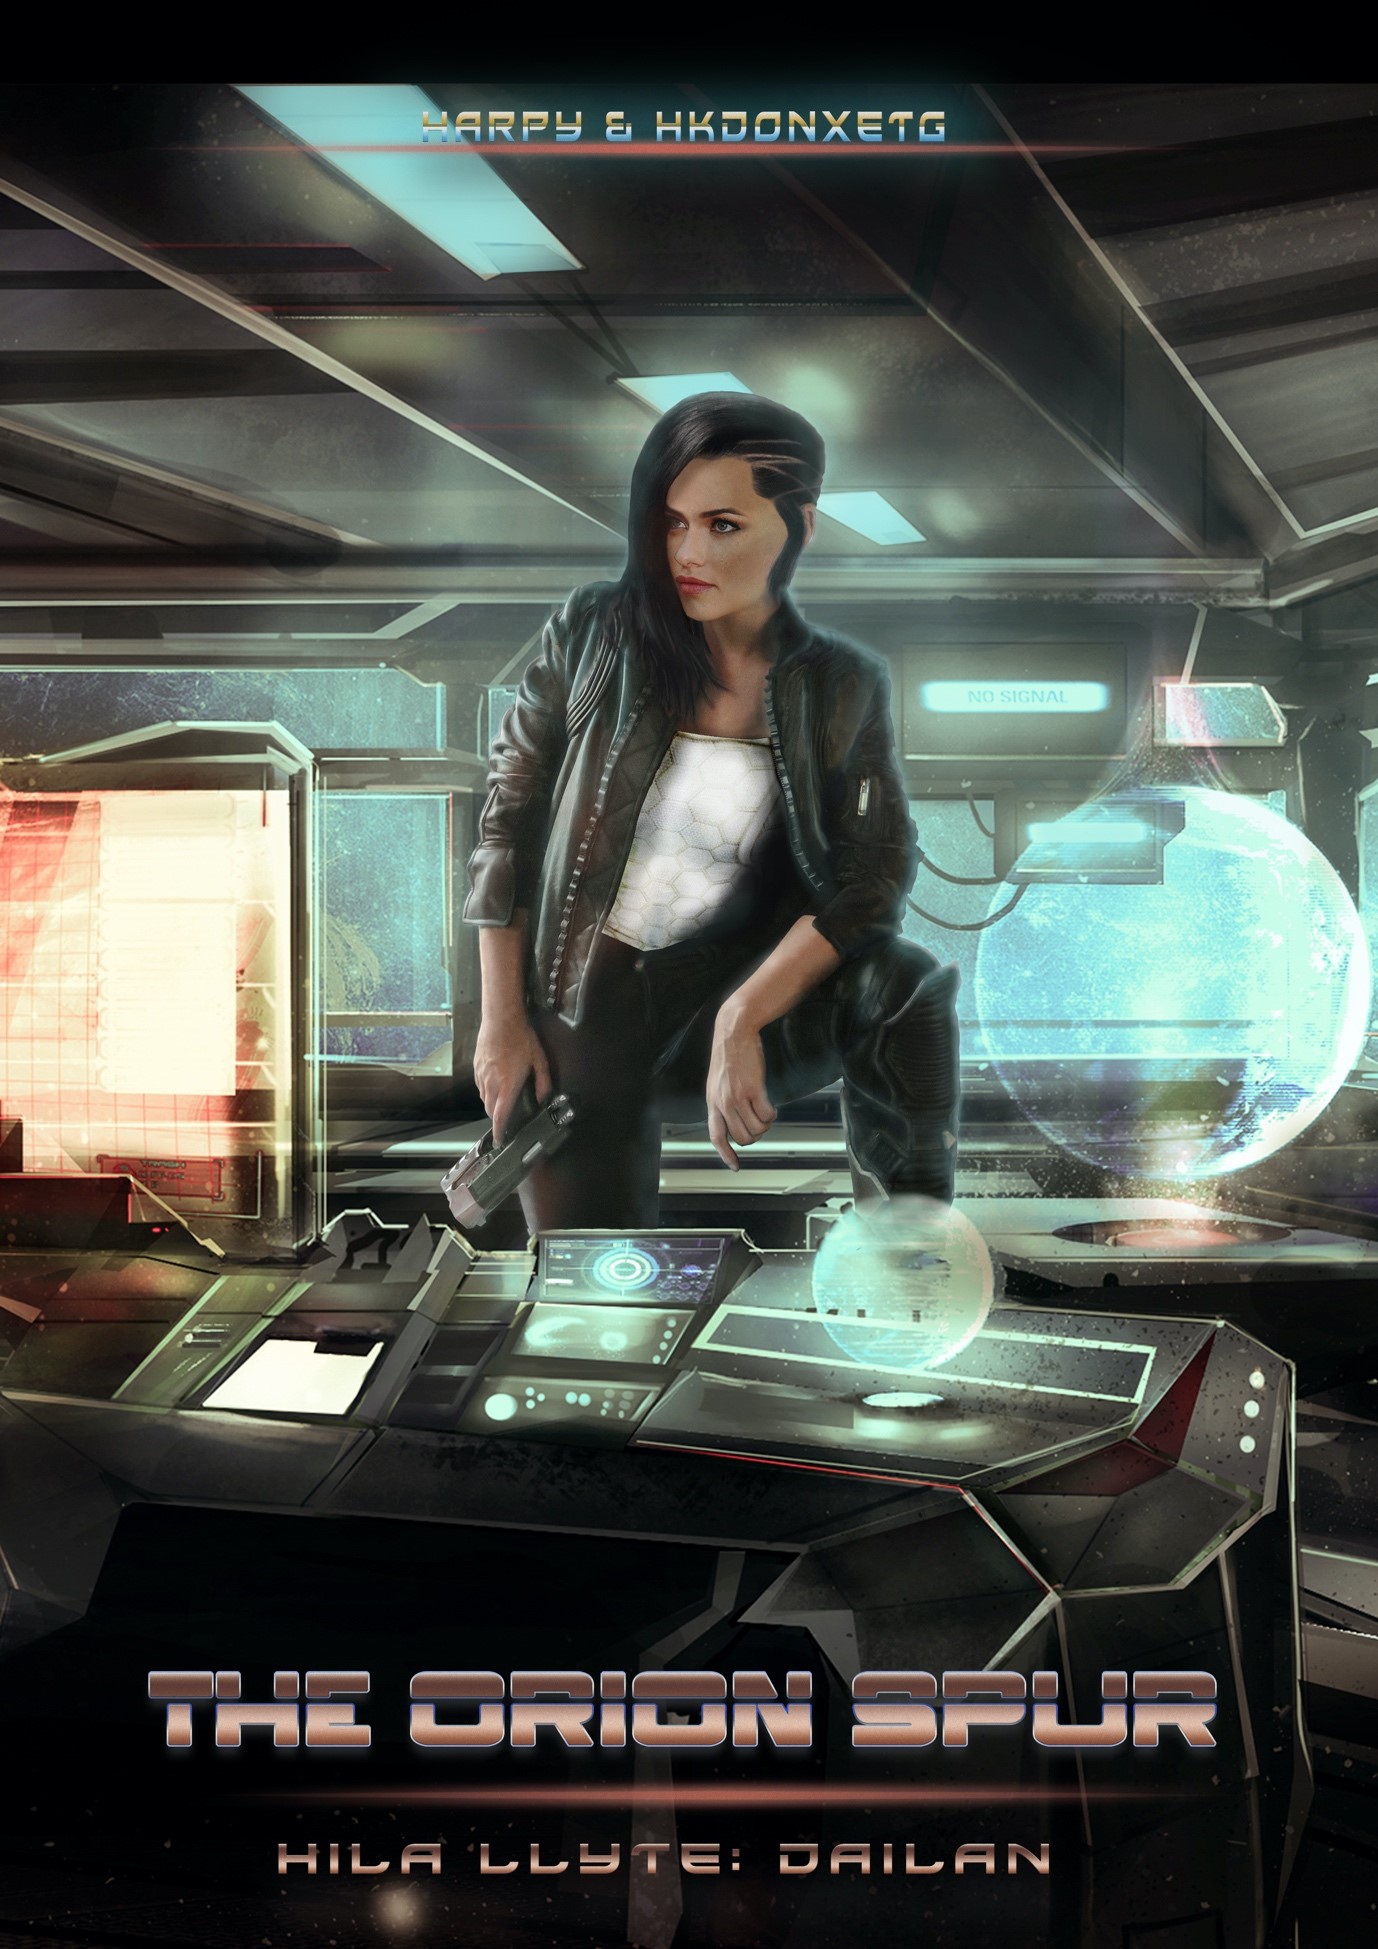 cover art - woman standing in a starship holding a weapon